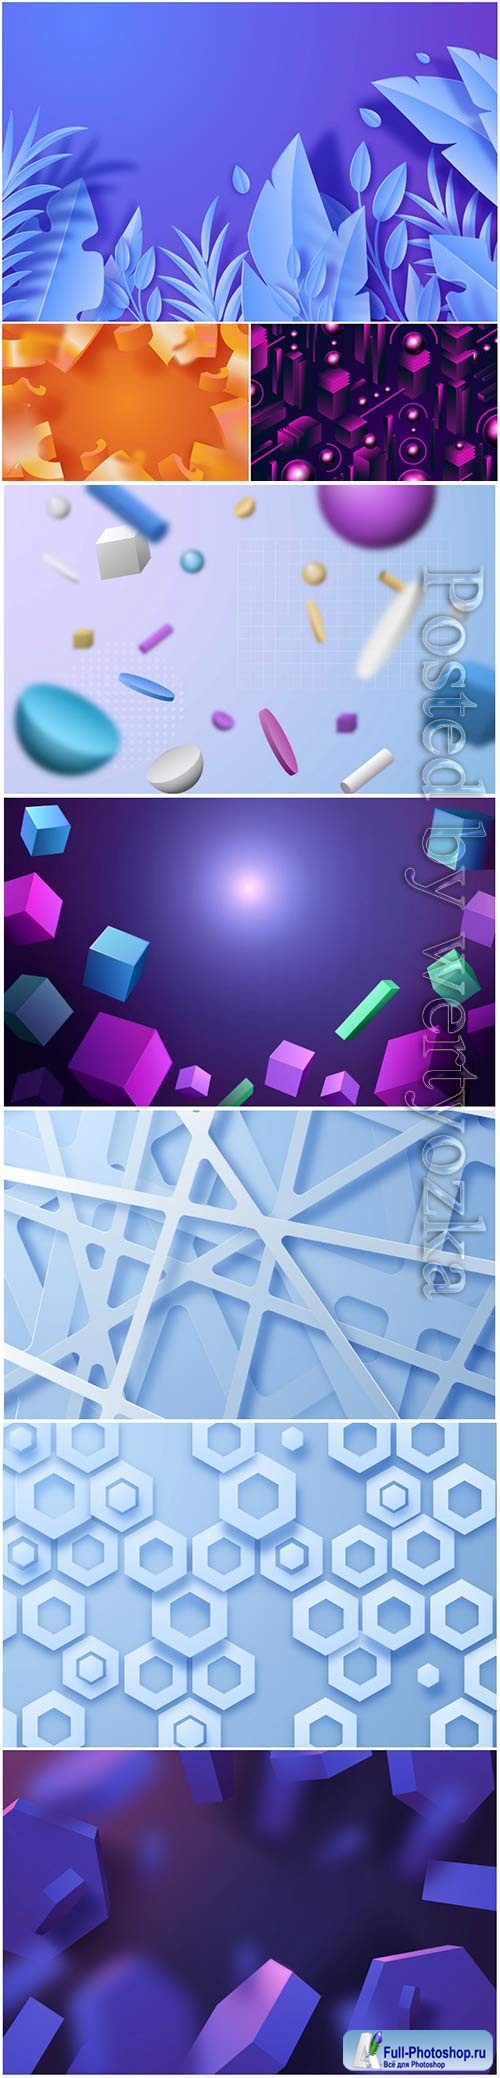 Abstract vector background, 3d models template # 4